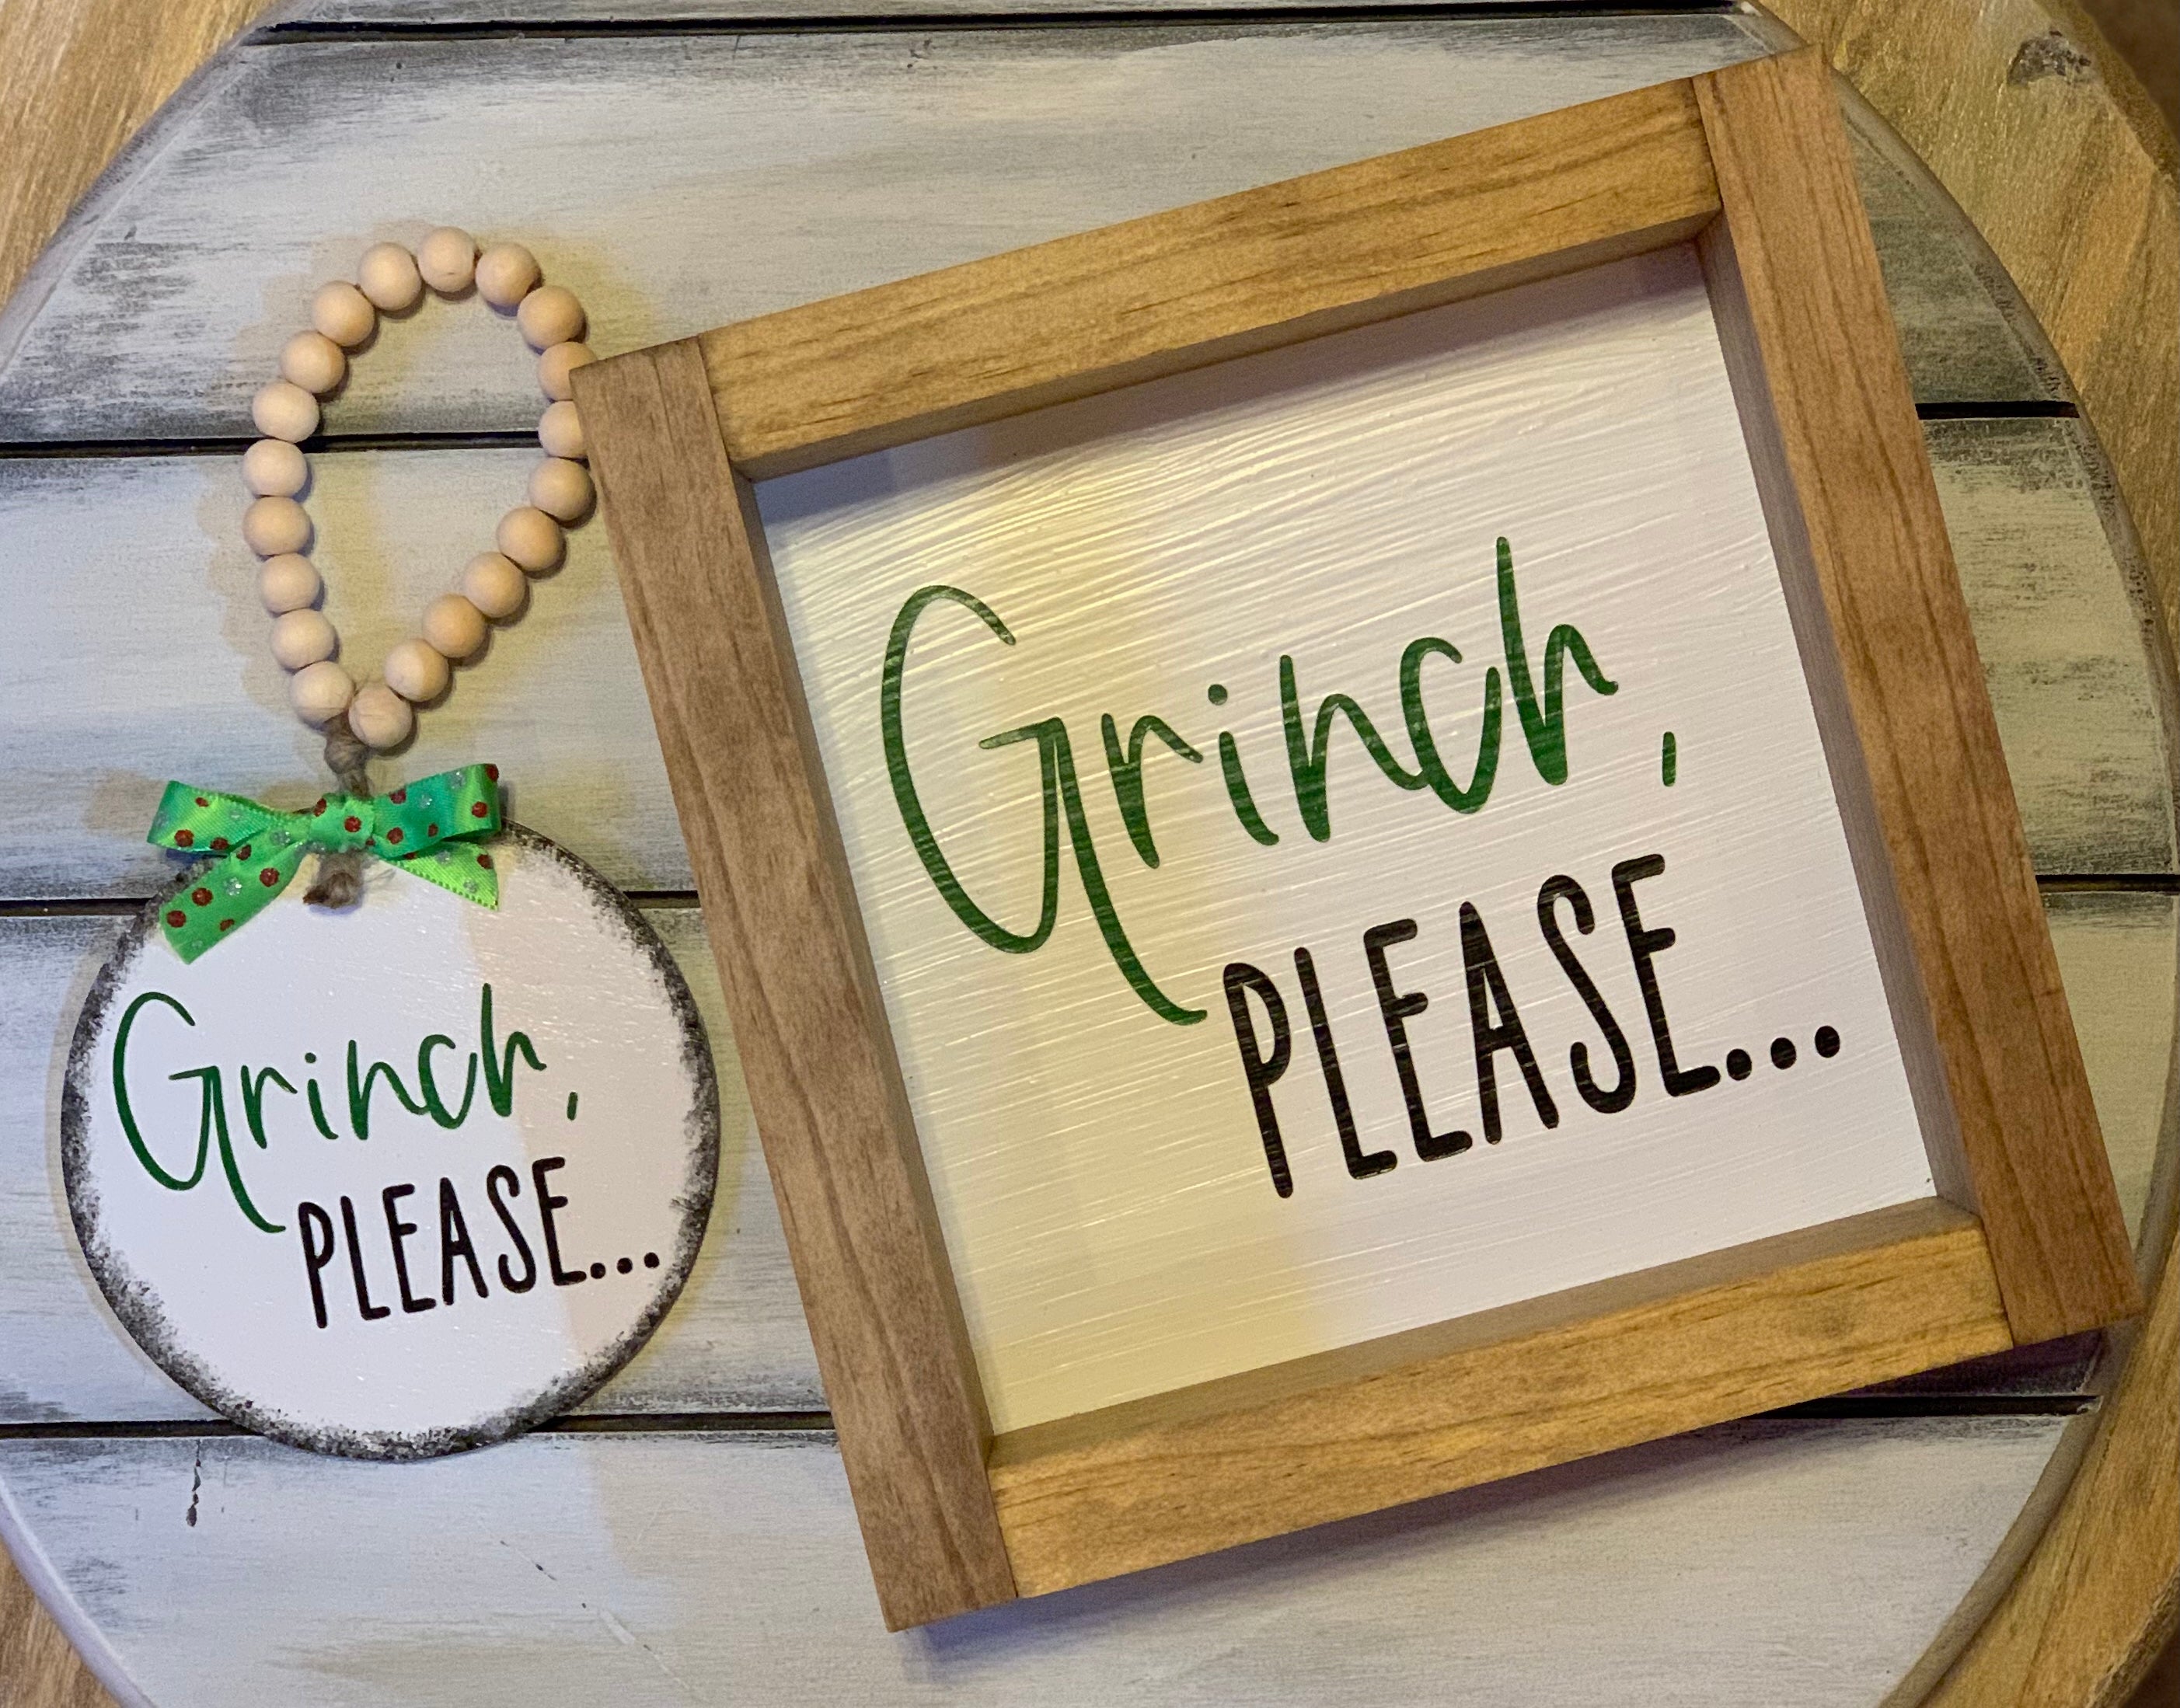 Grinch, Please 7x7 Frame shows the sign and the Grinch, Please ornament side by side.  Each product sold separately.